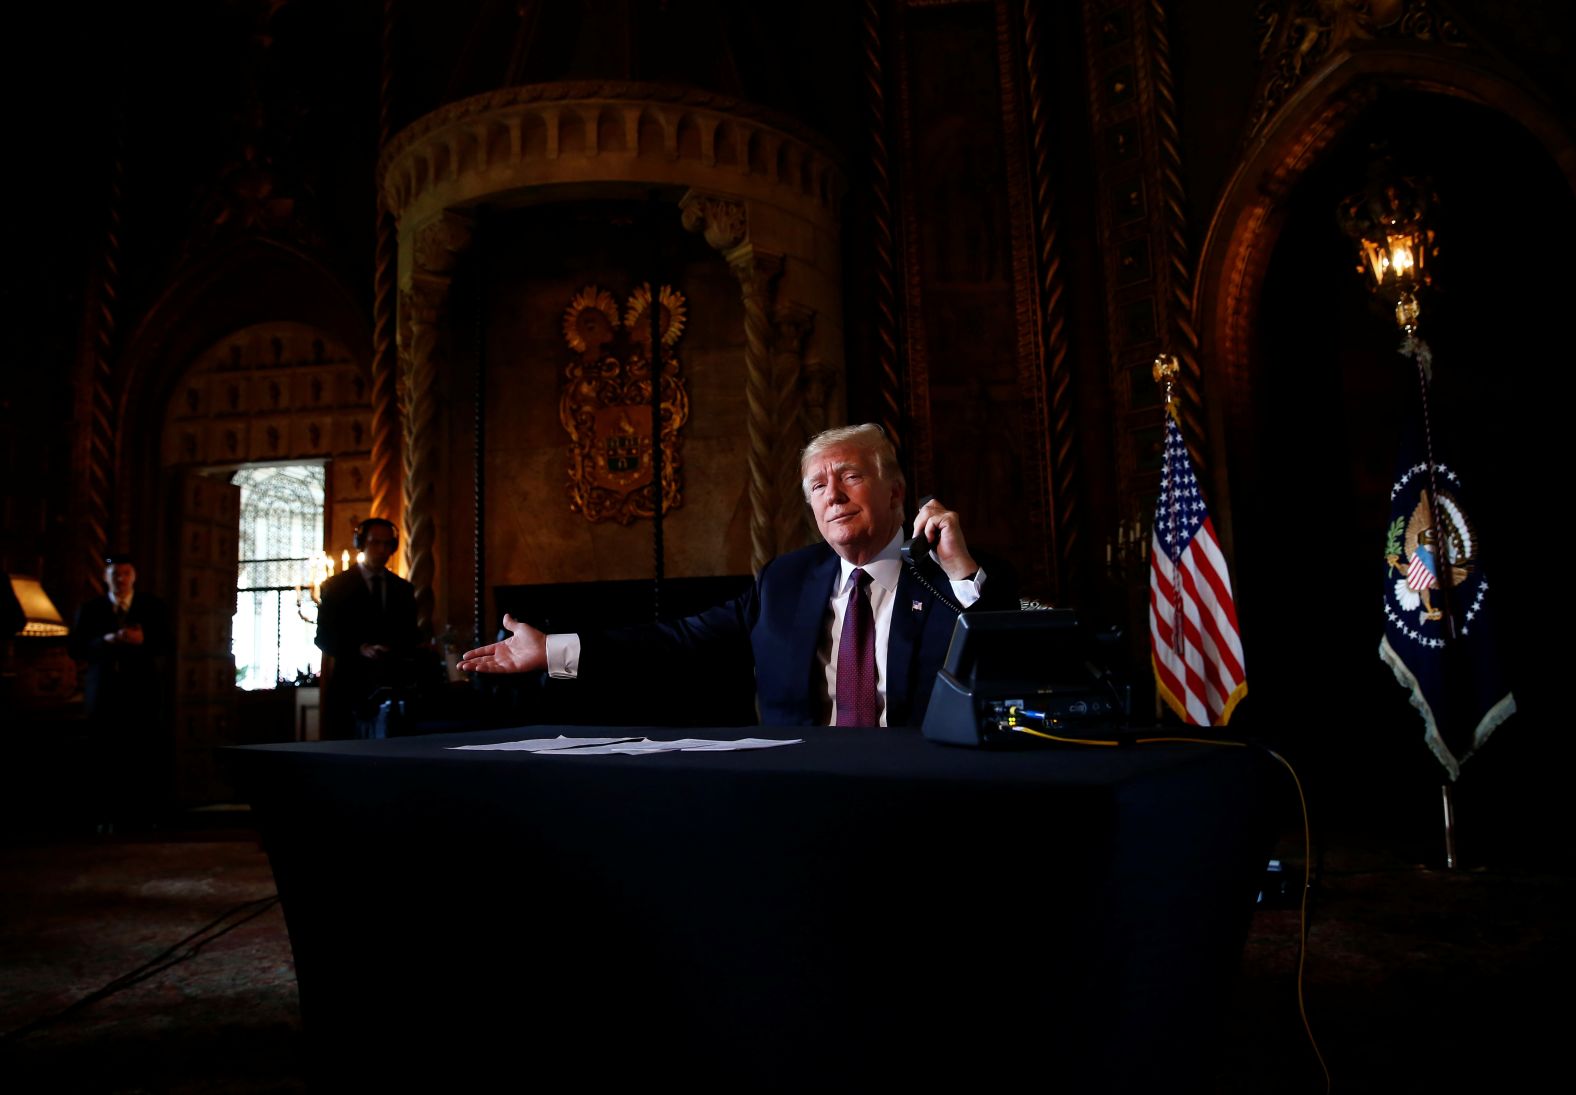 Trump calls troops from his Mar-a-Lago resort in Palm Beach, Florida, on November 22.